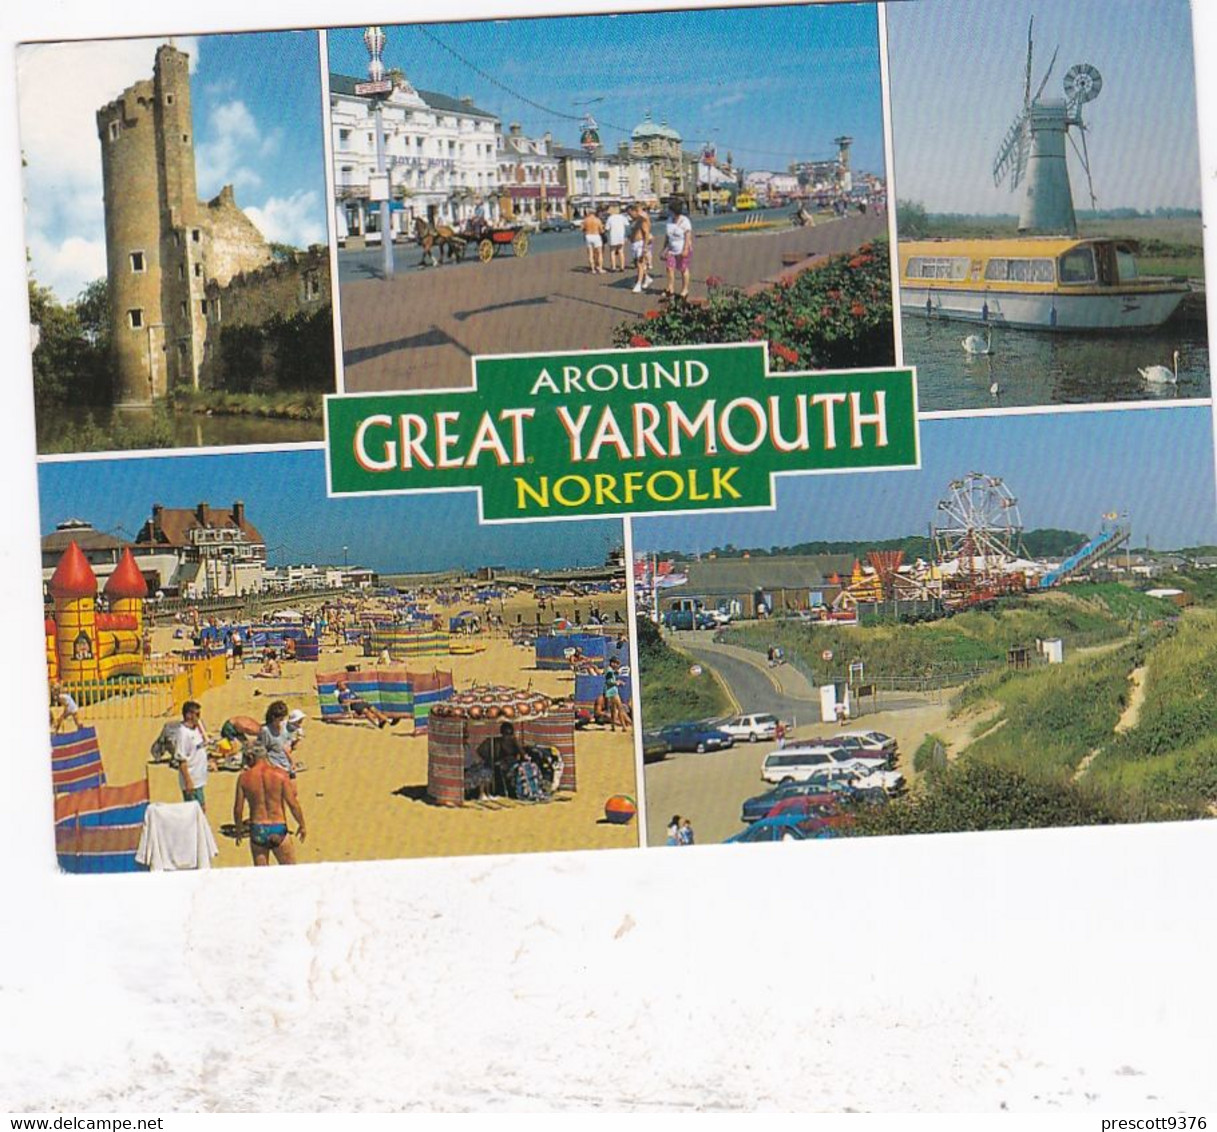 Around Great Yarmouth  - Multiview - Norfolk   -  Used Postcard - UK - Stamped 1993 - Great Yarmouth